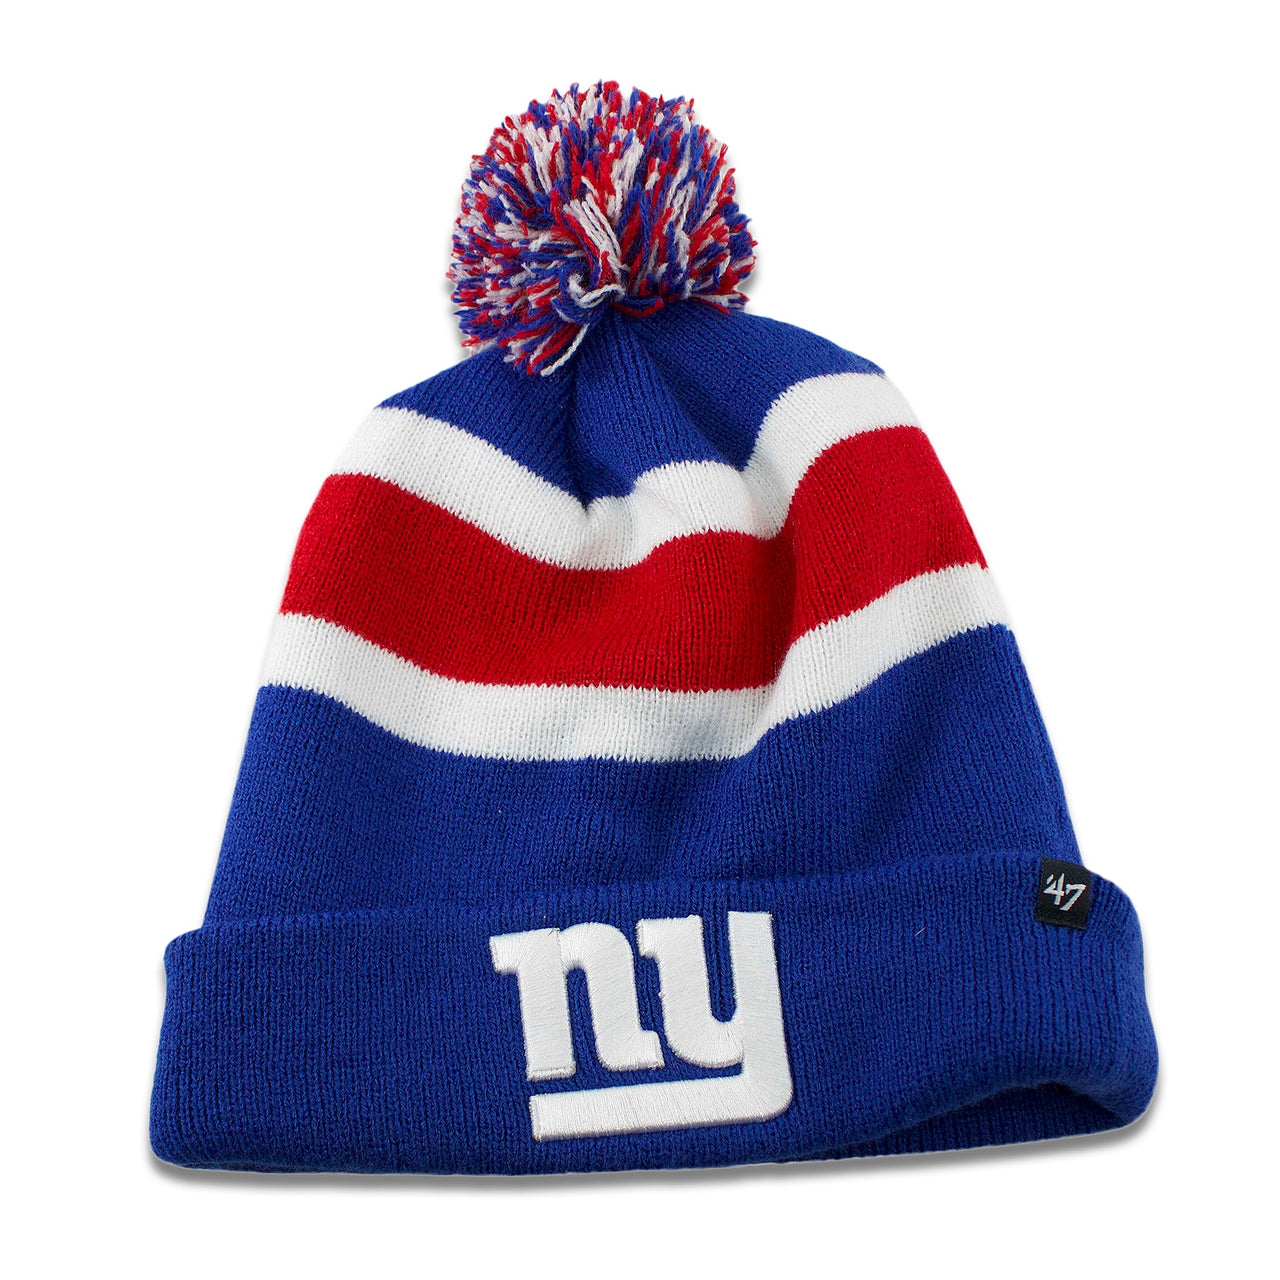 Embroidered on the front of the New York Giants winter beanie is the NY Giants logo in white